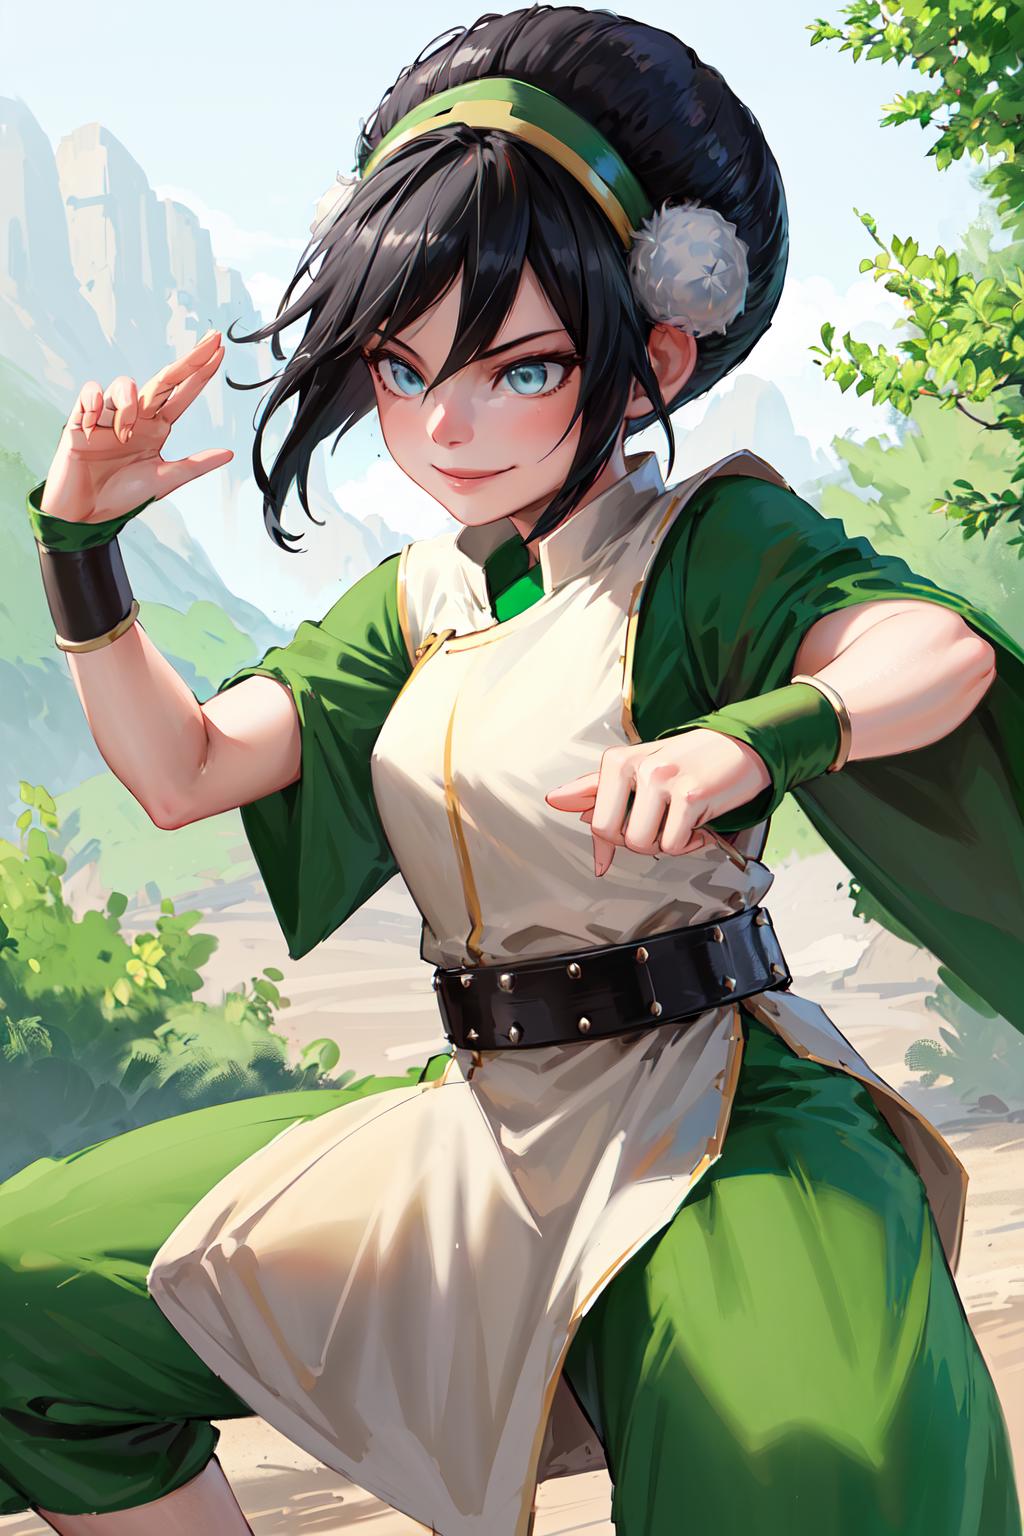 Toph Beifong / Avatar: the Last Airbender image by h_madoka